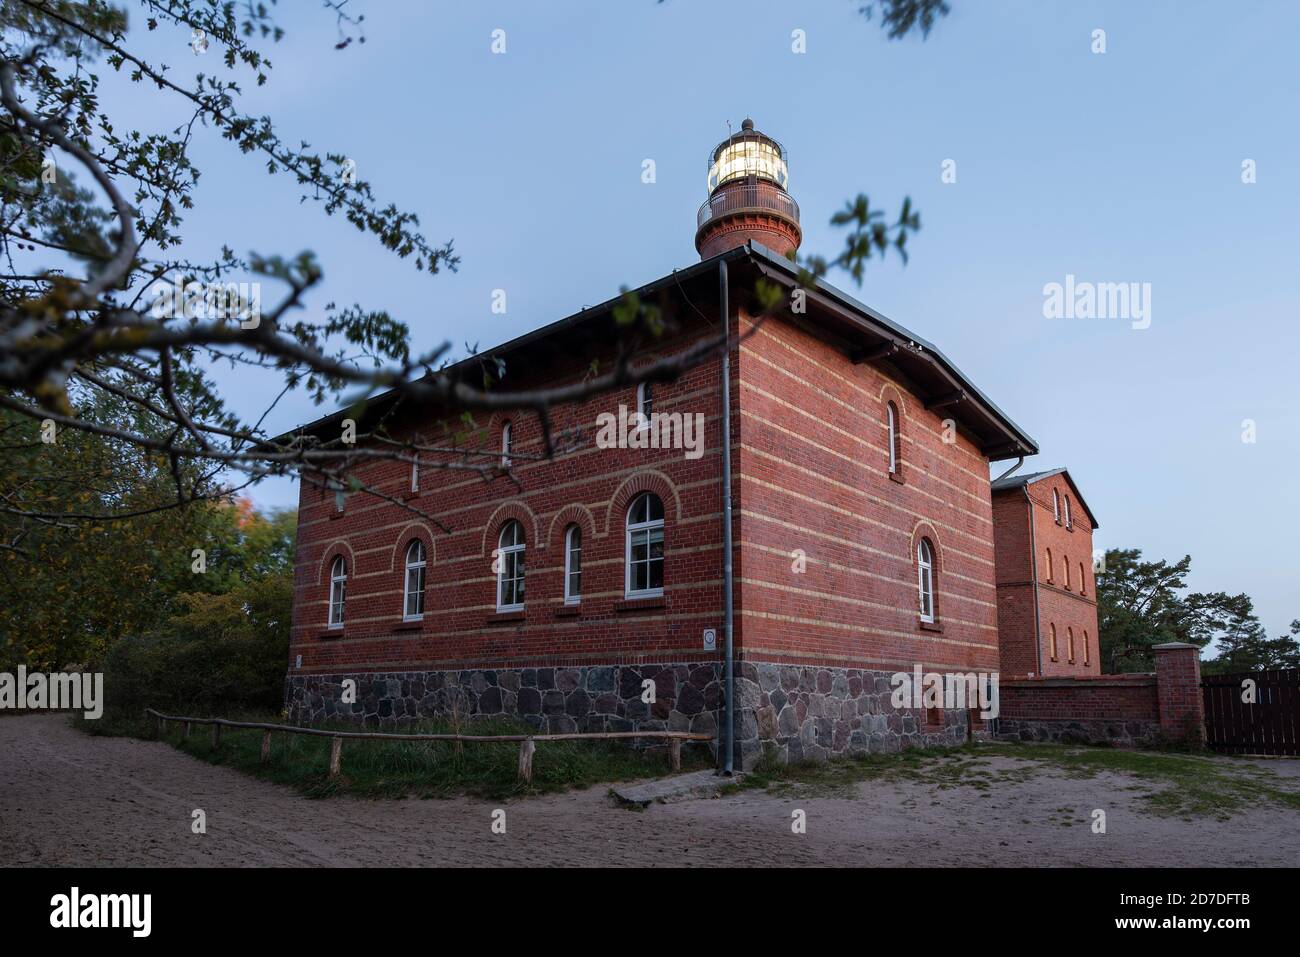 Prerow, Germany. 19th Oct, 2020. The lighthouse at Darßer Ort in the National Park Vorpommersche Boddenlandschaft. The Natureum, a branch of the German Oceanographic Museum Stralsund, is located on the site. Credit: Stephan Schulz/dpa-Zentralbild/ZB/dpa/Alamy Live News Stock Photo